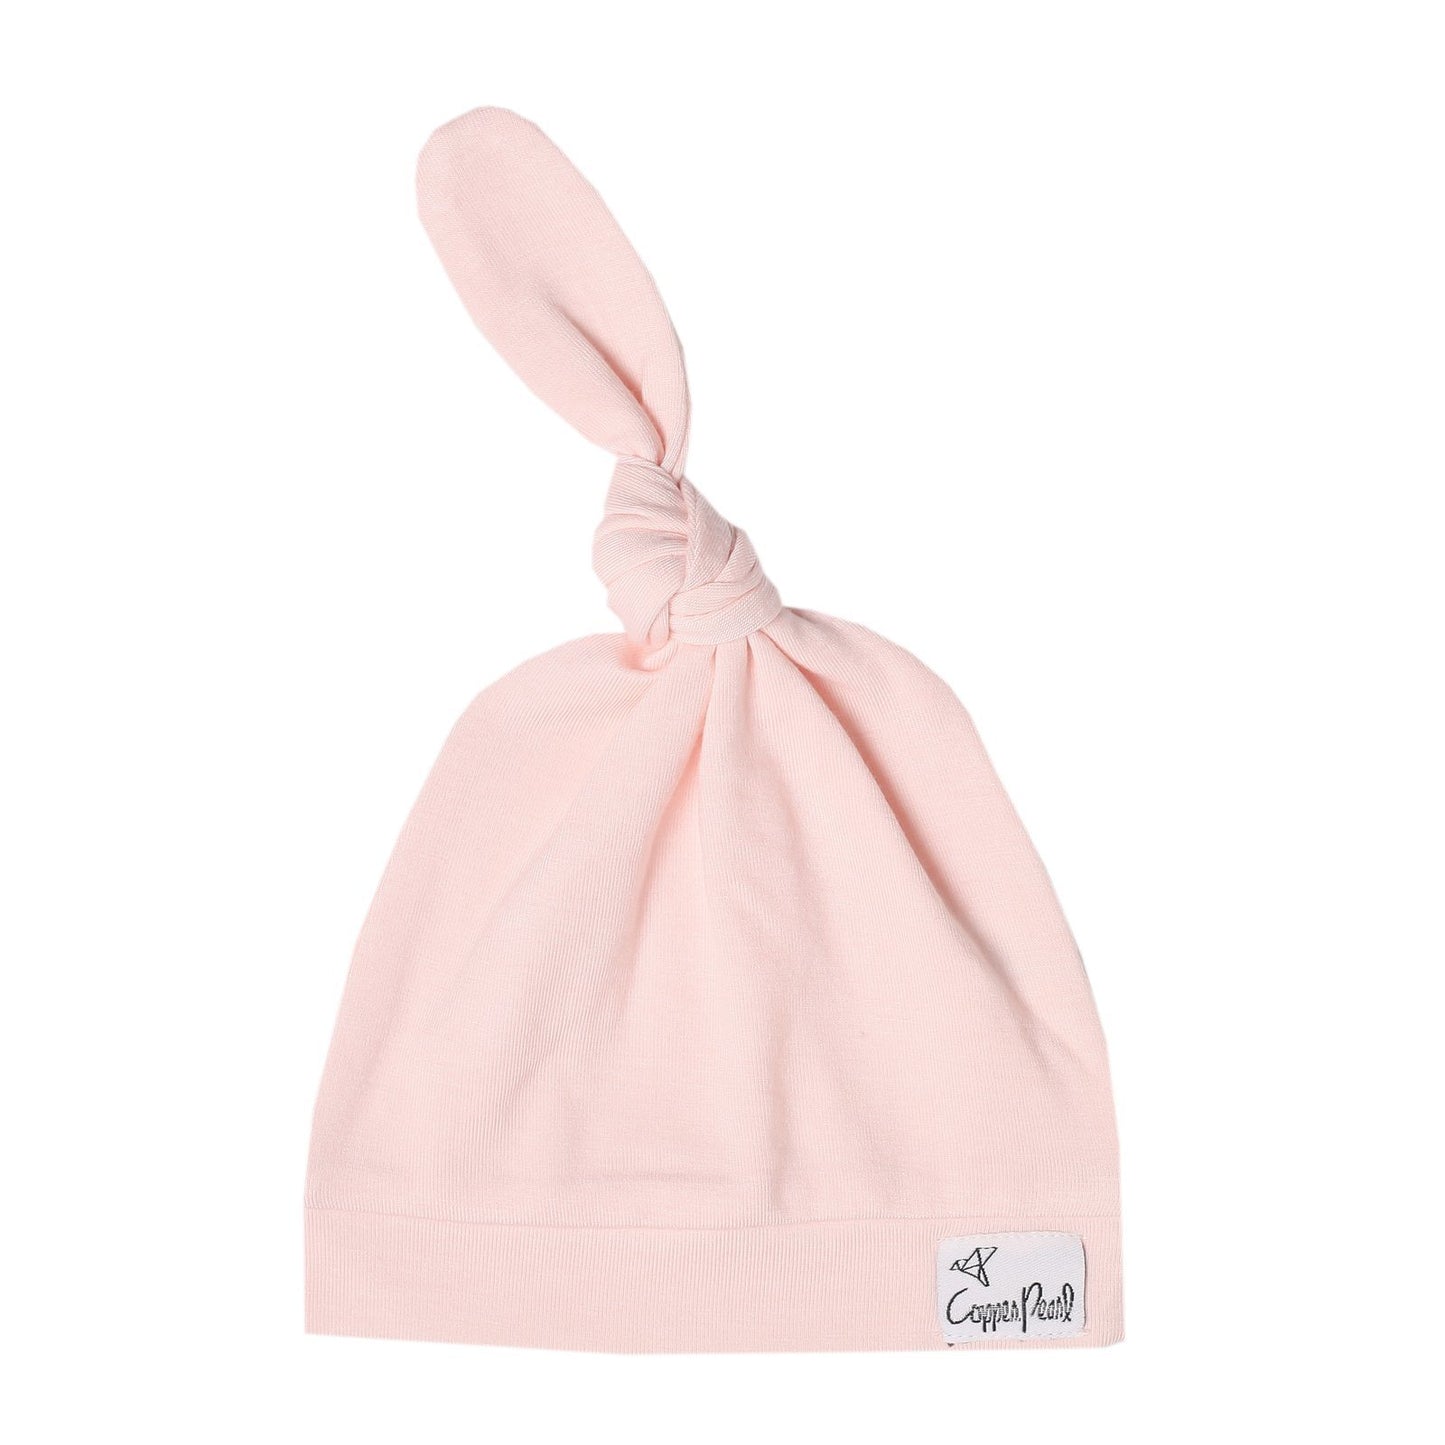 Top Knot Hats Hats Copper Pearl Blush 